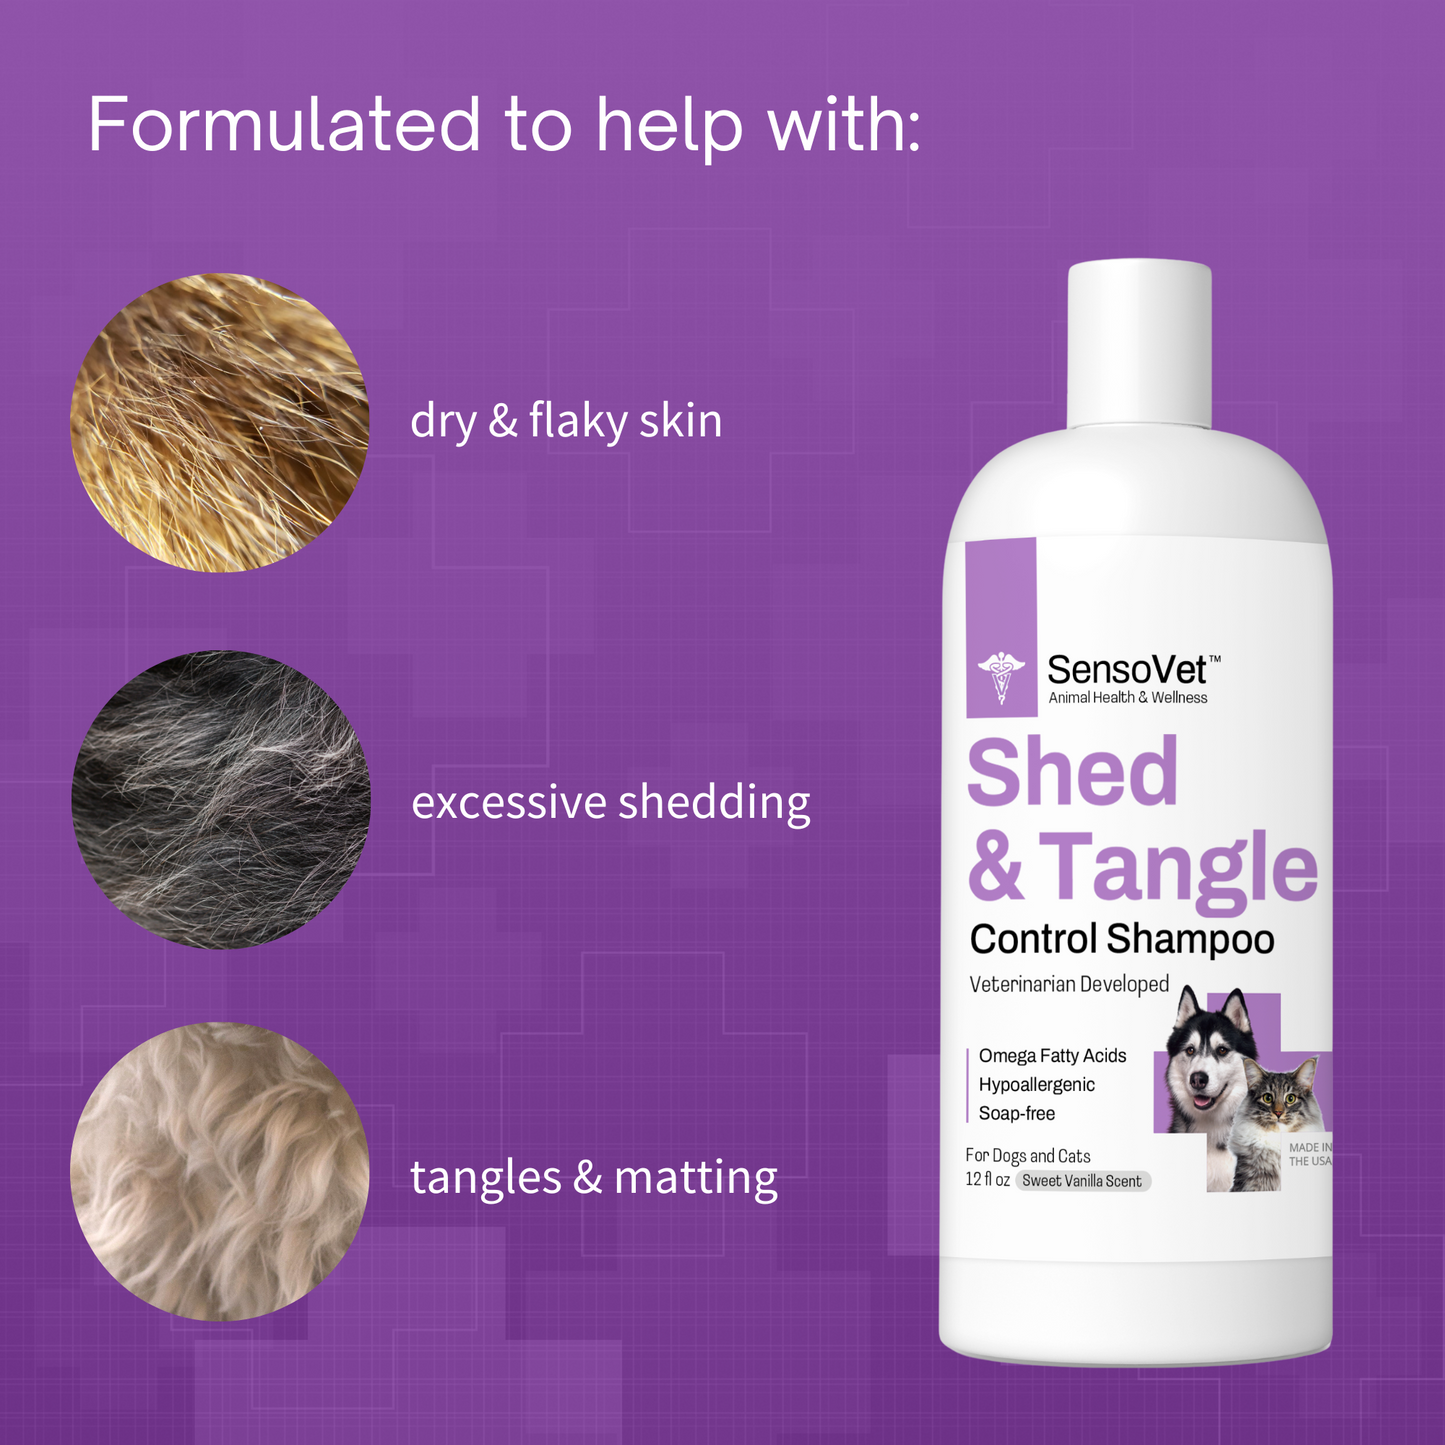 Formulated to help with dry flaky skin, excessive shedding, tangles and matting in dogs and cats